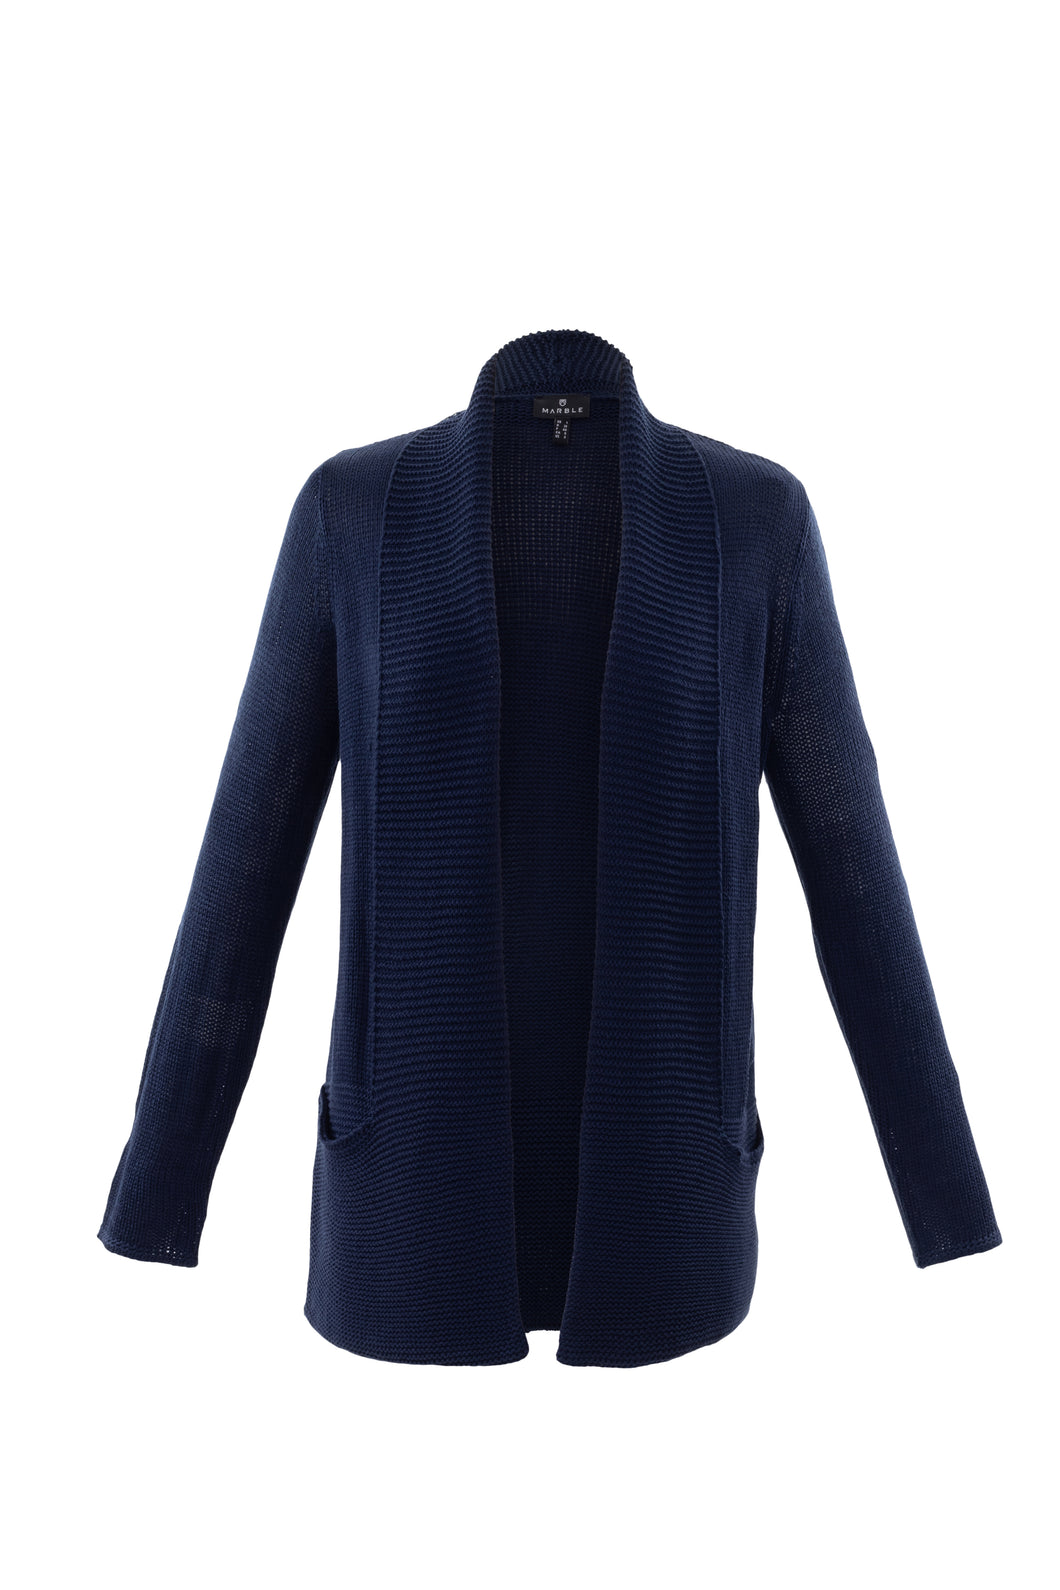 Marble - Relaxed fit Cardigan - Navy